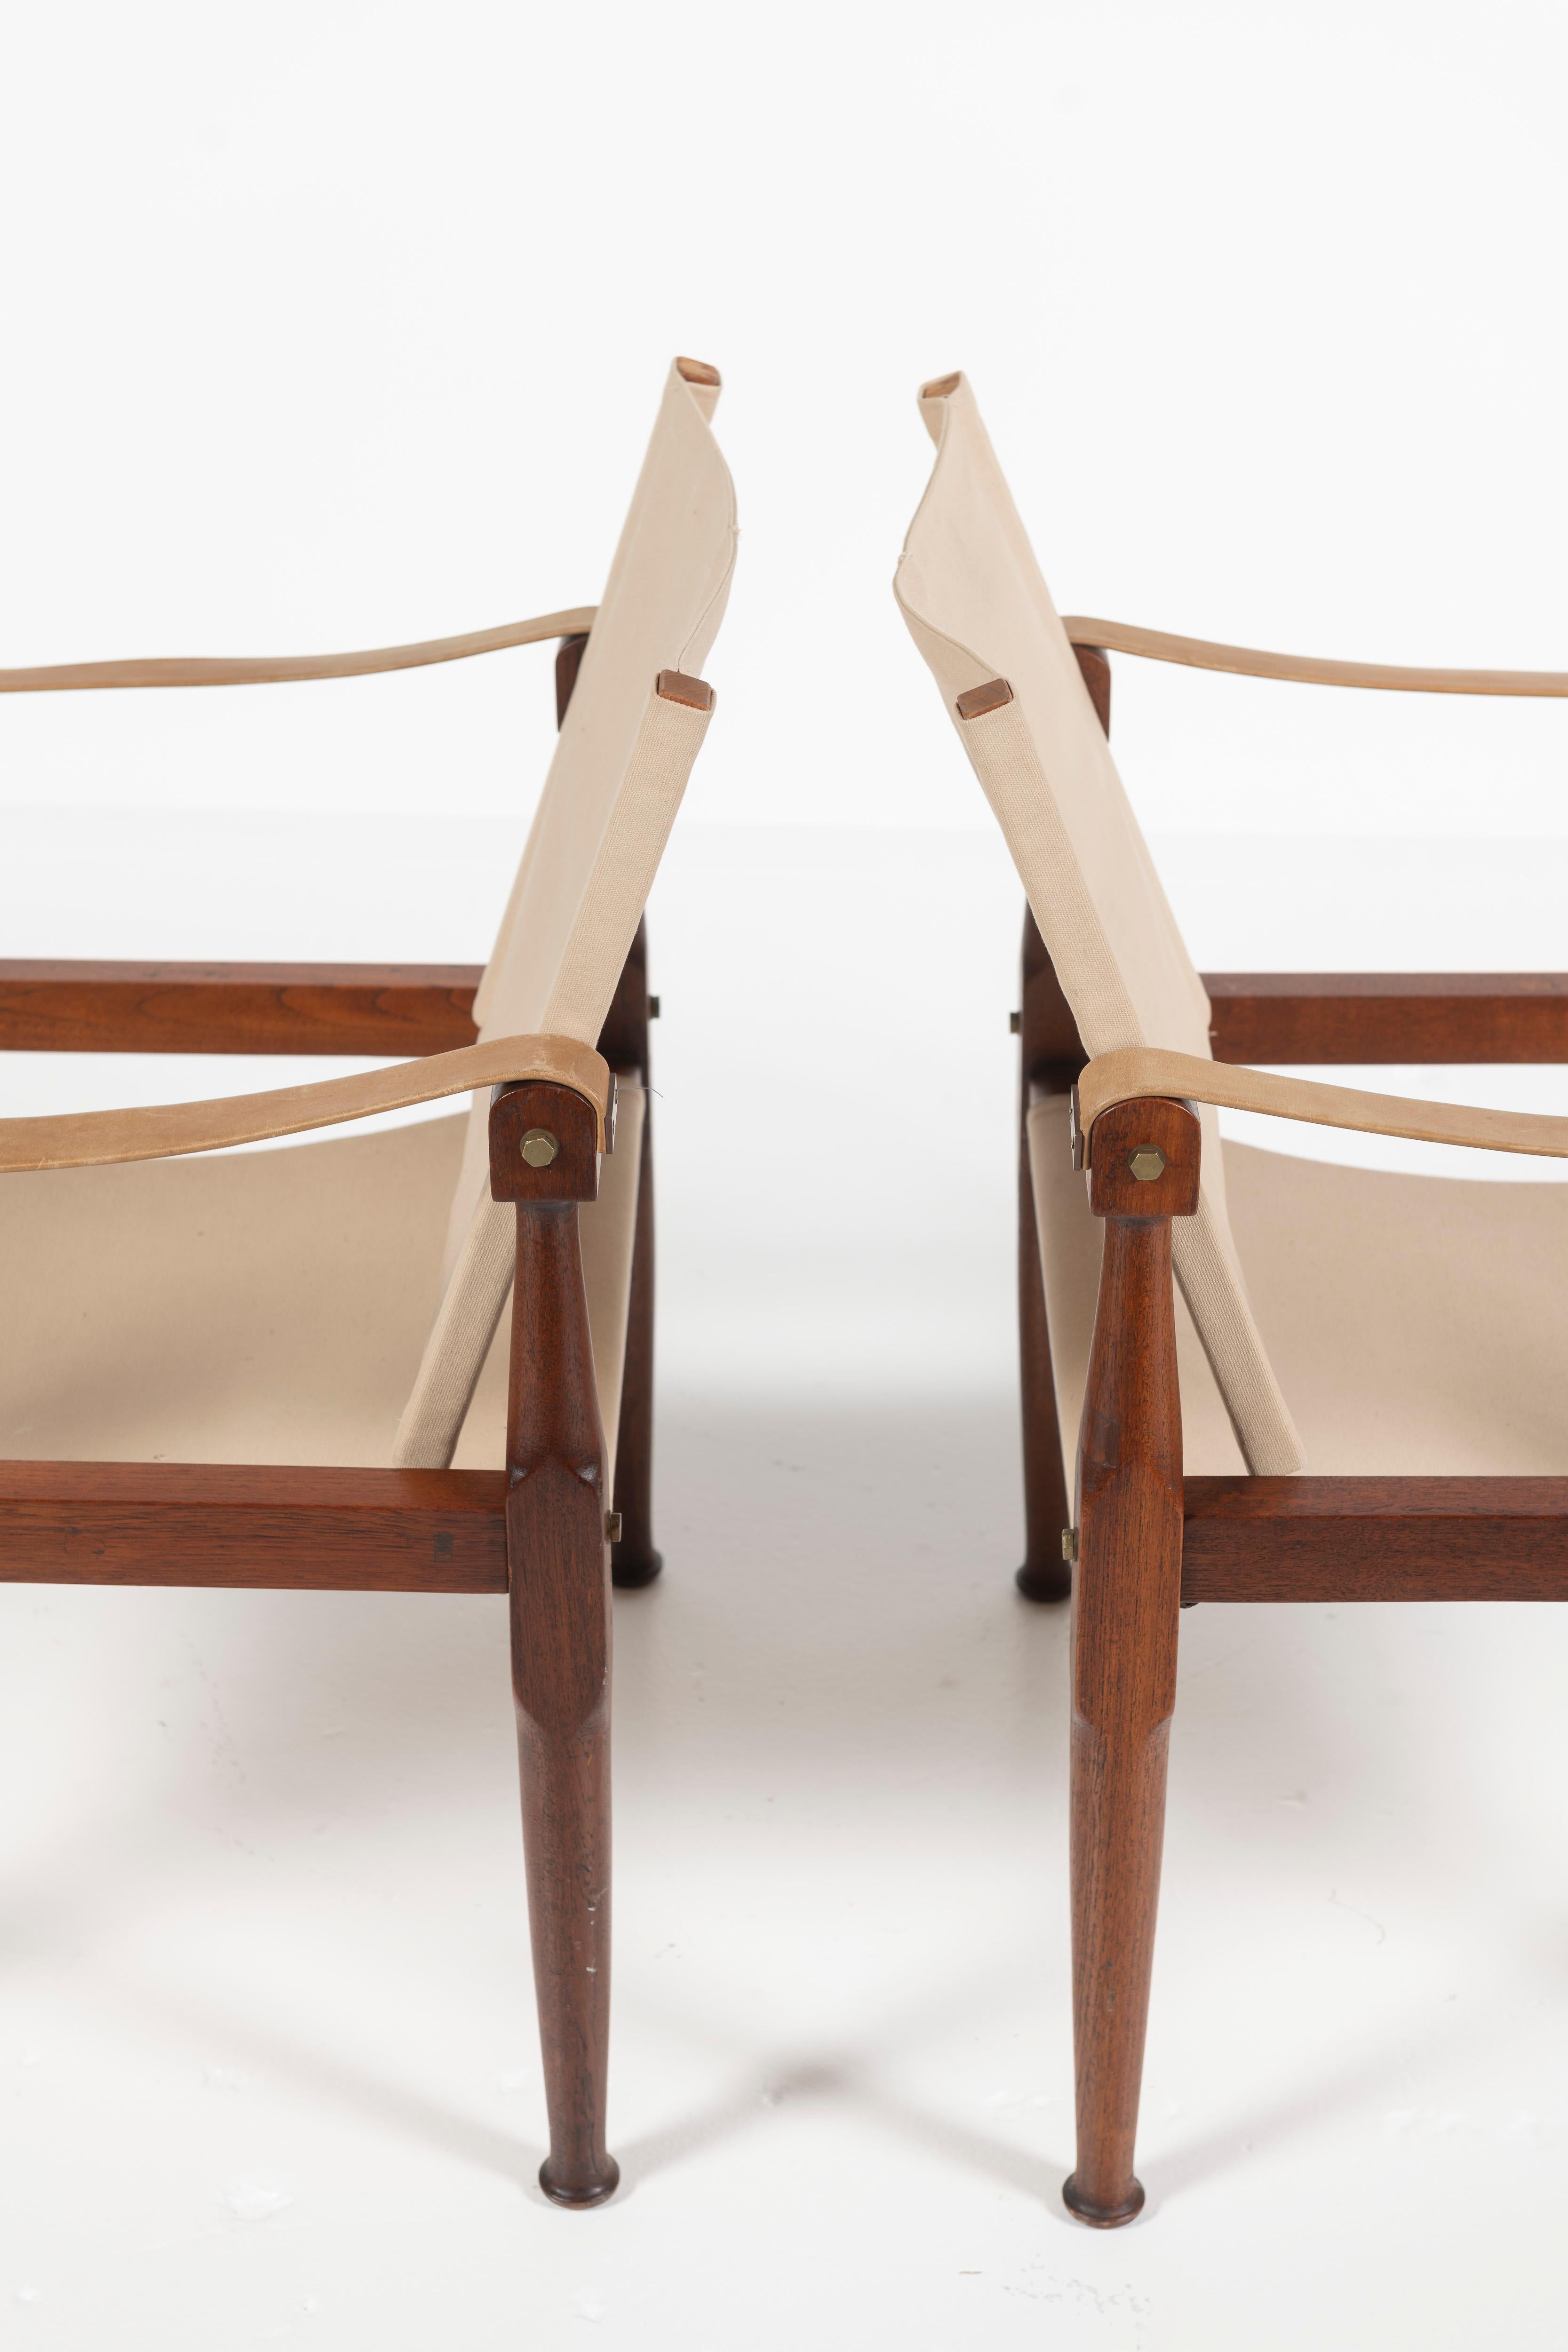 Brass Pair of Mid Century Campaign Chairs in the style of Kaare Klint, Denmark, 1960 For Sale